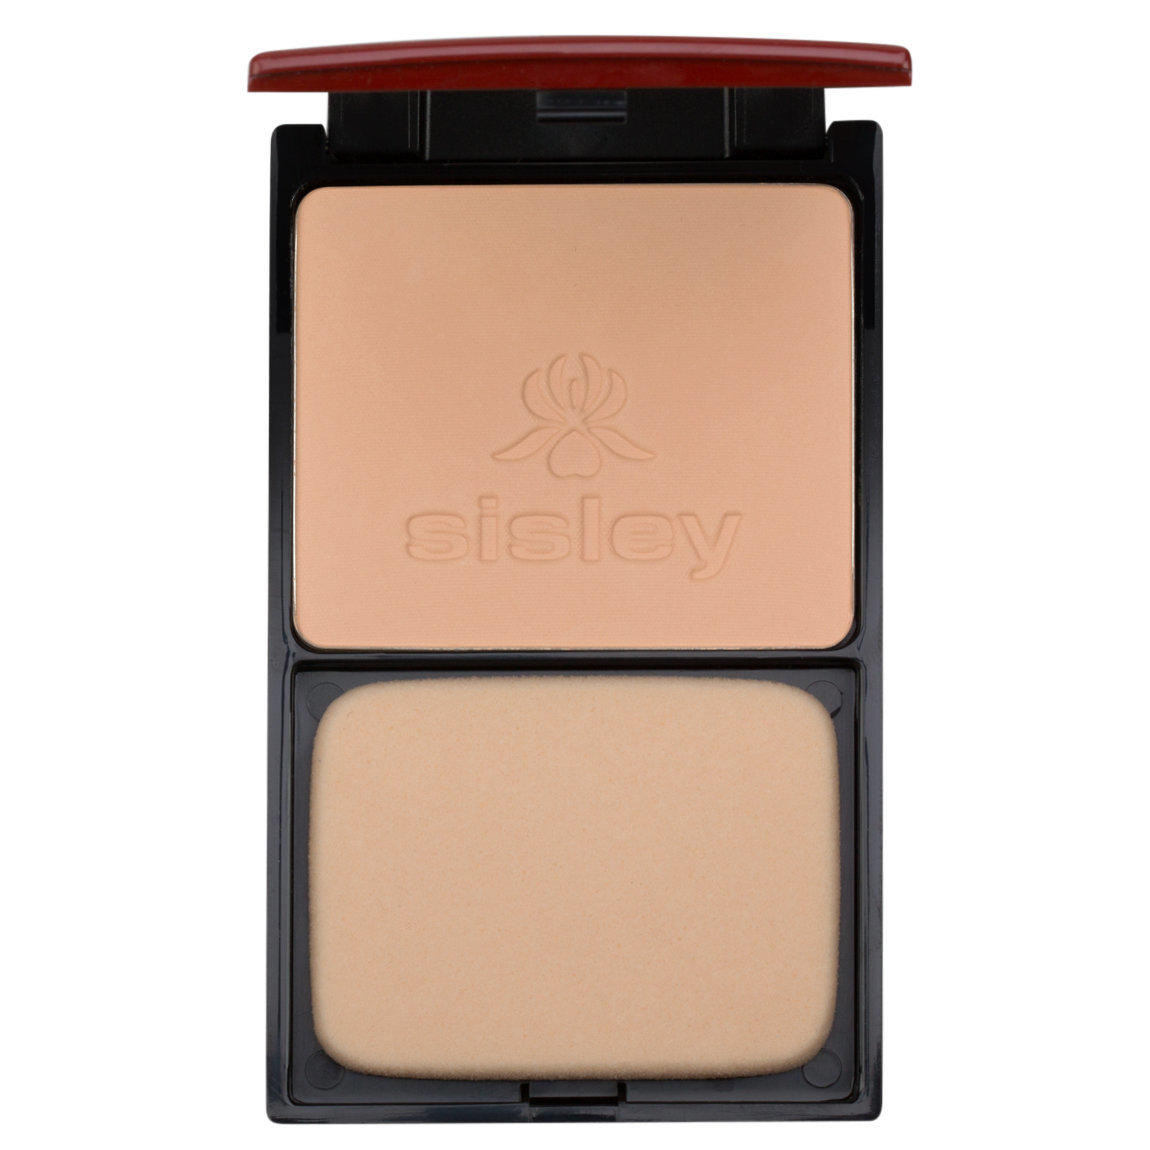 Sisley-Paris Phyto-Teint Eclat Compact 1 Ivory alternative view 1 - product swatch.